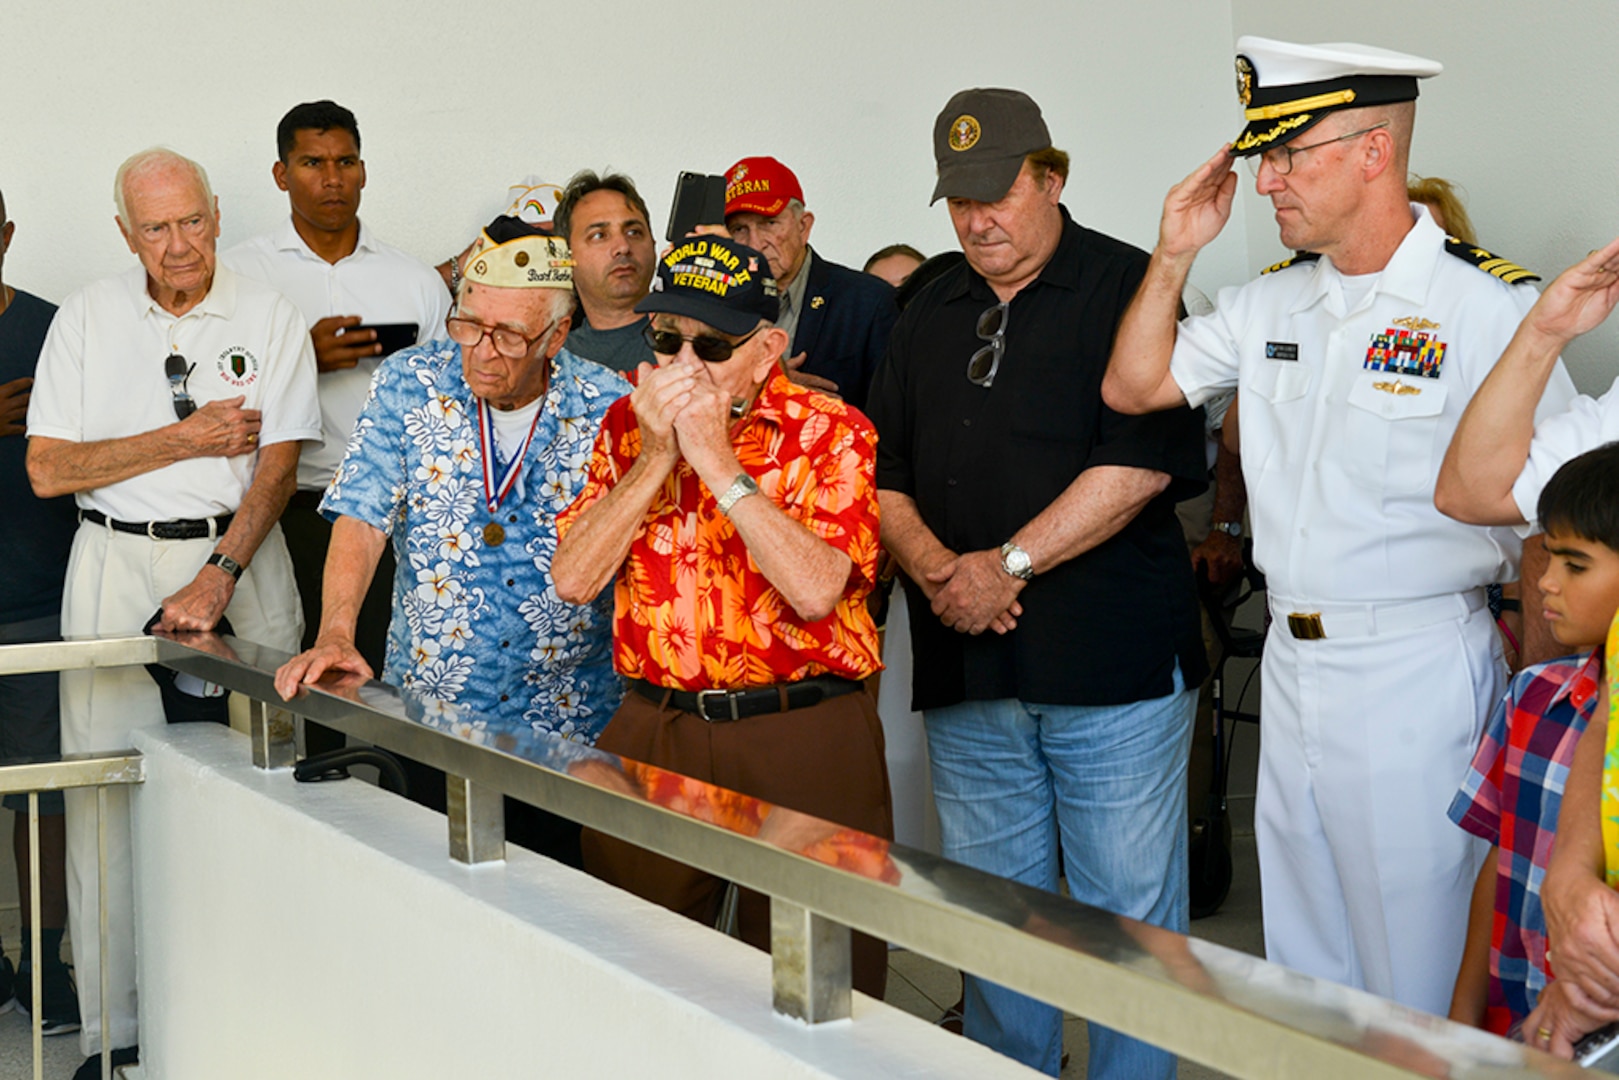 PEARL HARBOR (Dec. 5, 2015) Peter B. Dupre', a World War II Veteran, plays taps on his harmonica during a floral tribute aboard the USS Arizona Memorial on Joint Base Pearl Harbor-Hickam (JBPHH). The floral tribute was part of Pearl Harbor Survivor/ World War II Family and Friends Harbor Tour that took place at JBPHH. Several events that will take place leading up to the 74th anniversary of Pearl Harbor Day to pay tribute to the nationÕs military while enlightening Americans about veterans and service. 